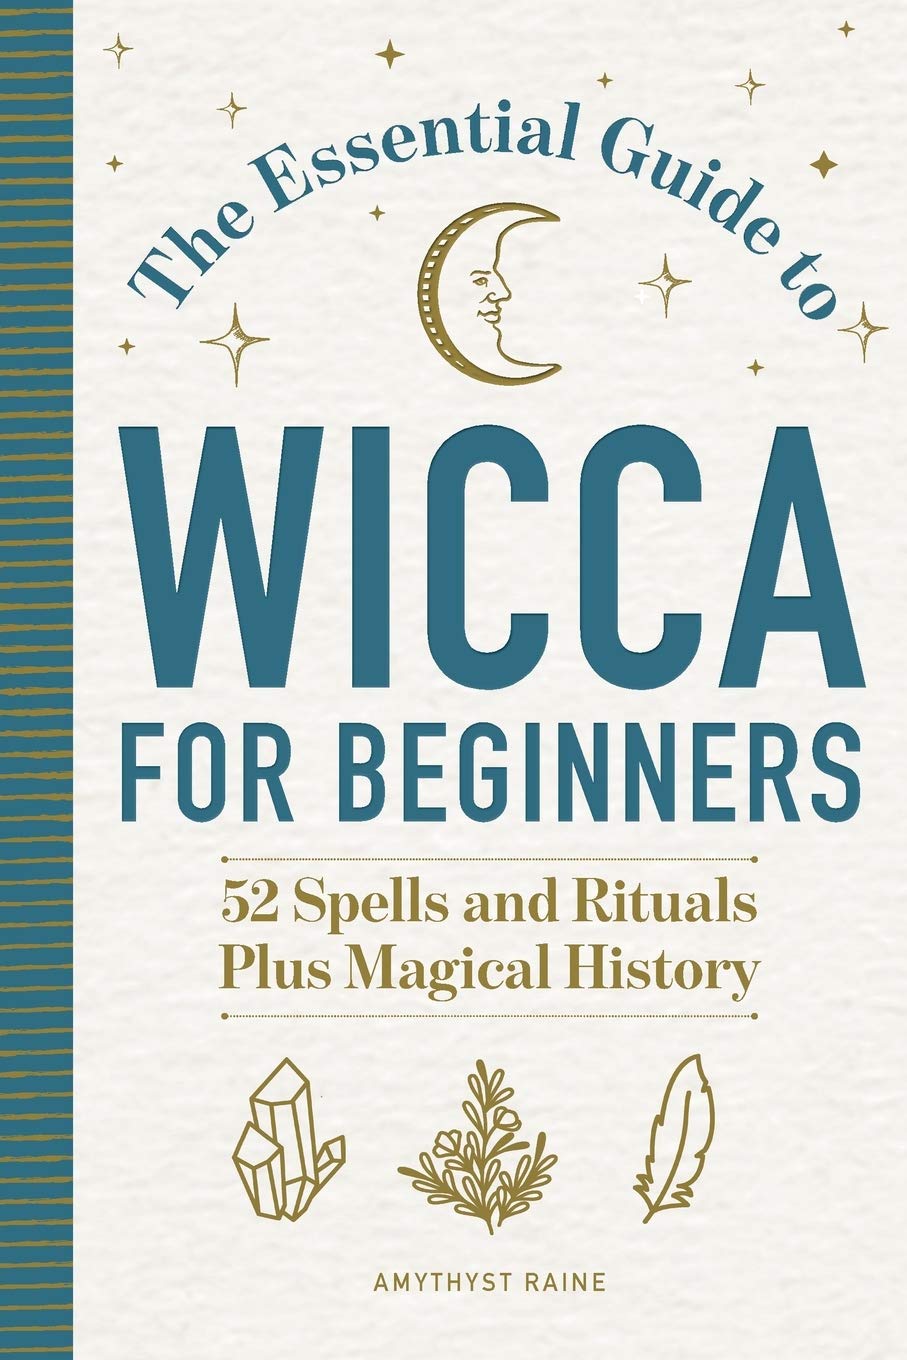 The Essential Guide to Wicca for Beginners: 52 Spells and Rituals, Plus Magical History